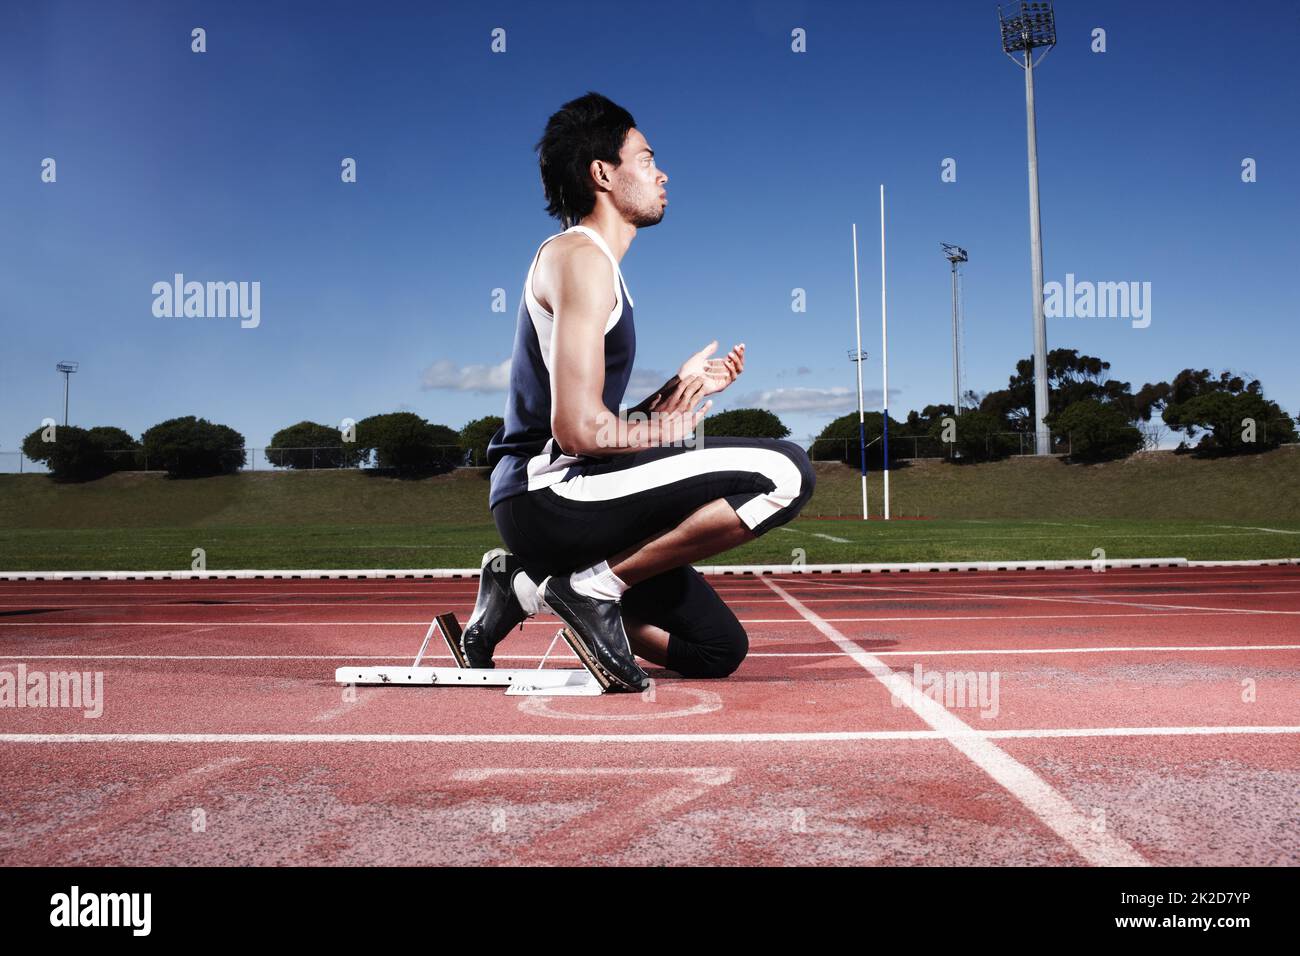 Clearing his mind before a race. A young athlete getting ready to start a race. Stock Photo